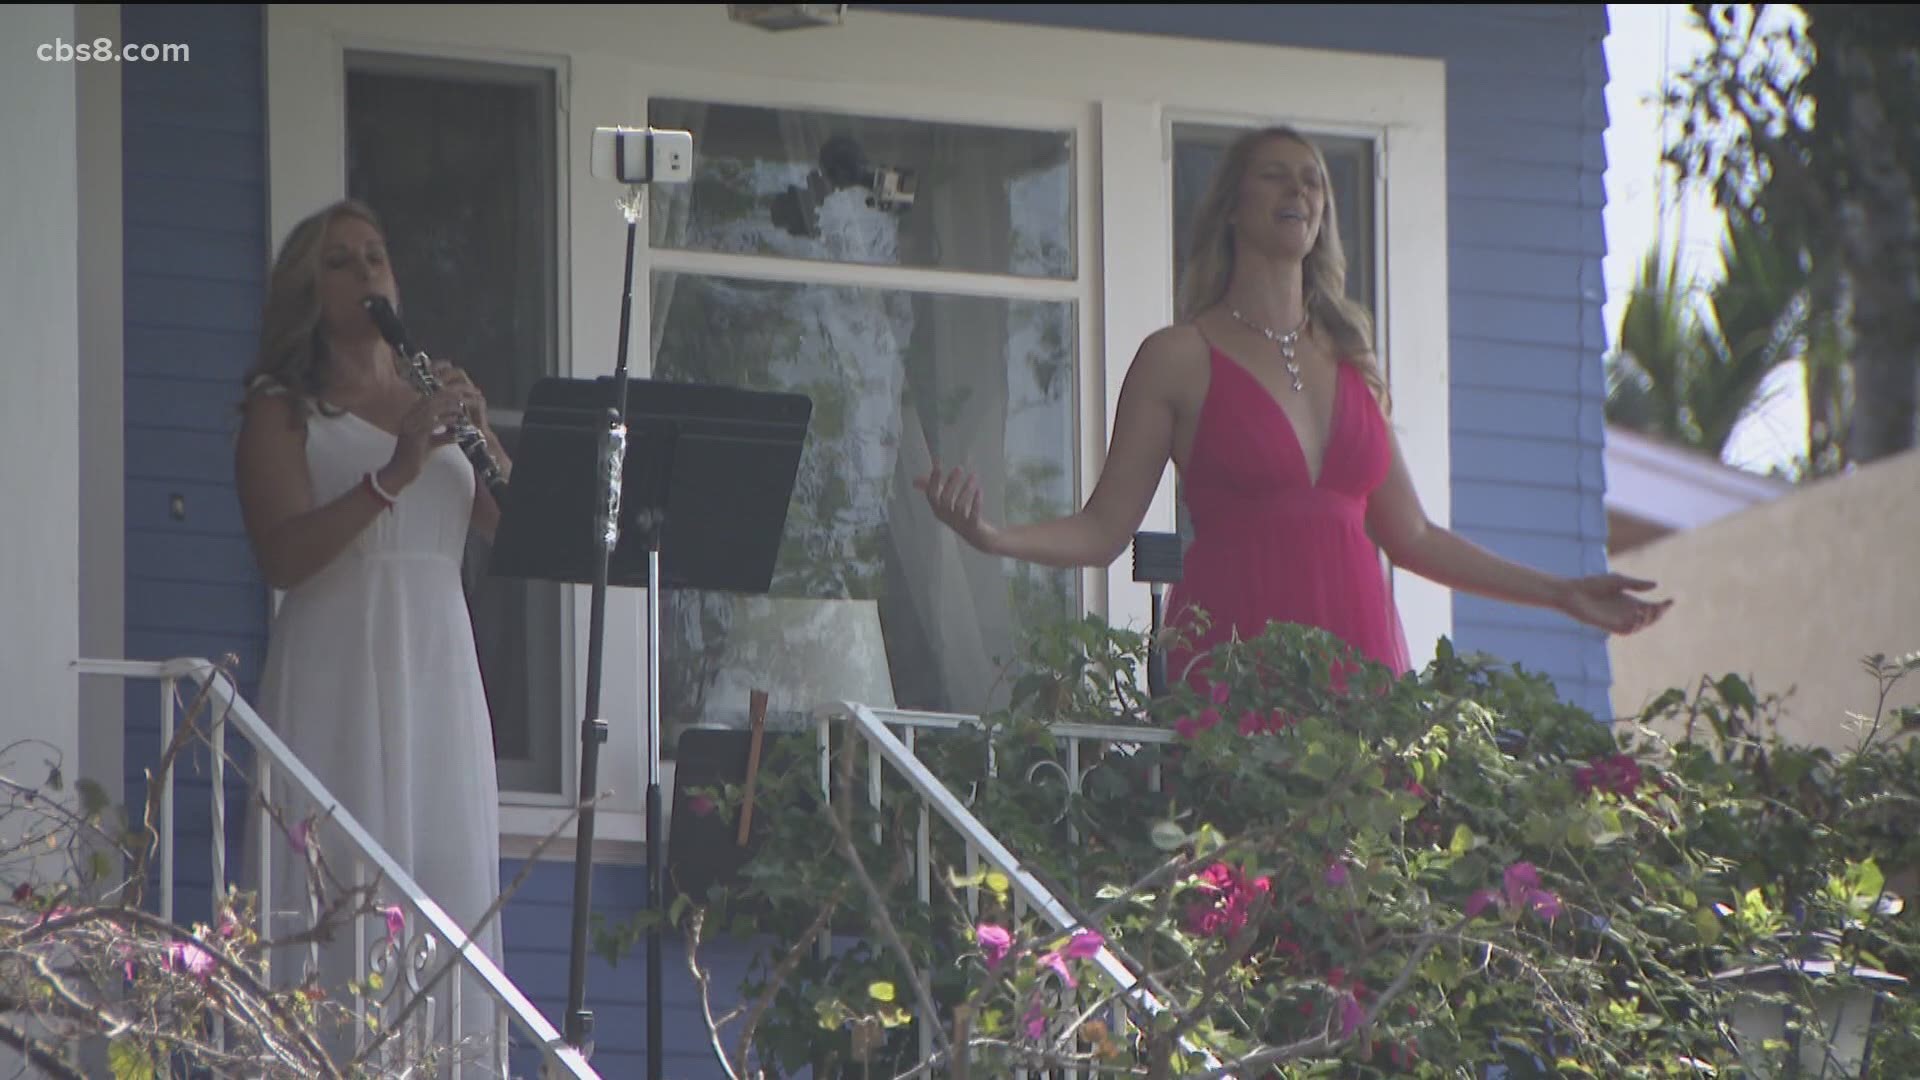 For weeks, crowds pulled up chairs and filled the streets and sidewalks to hear classically trained opera singer Victoria Robertson perform from her porch